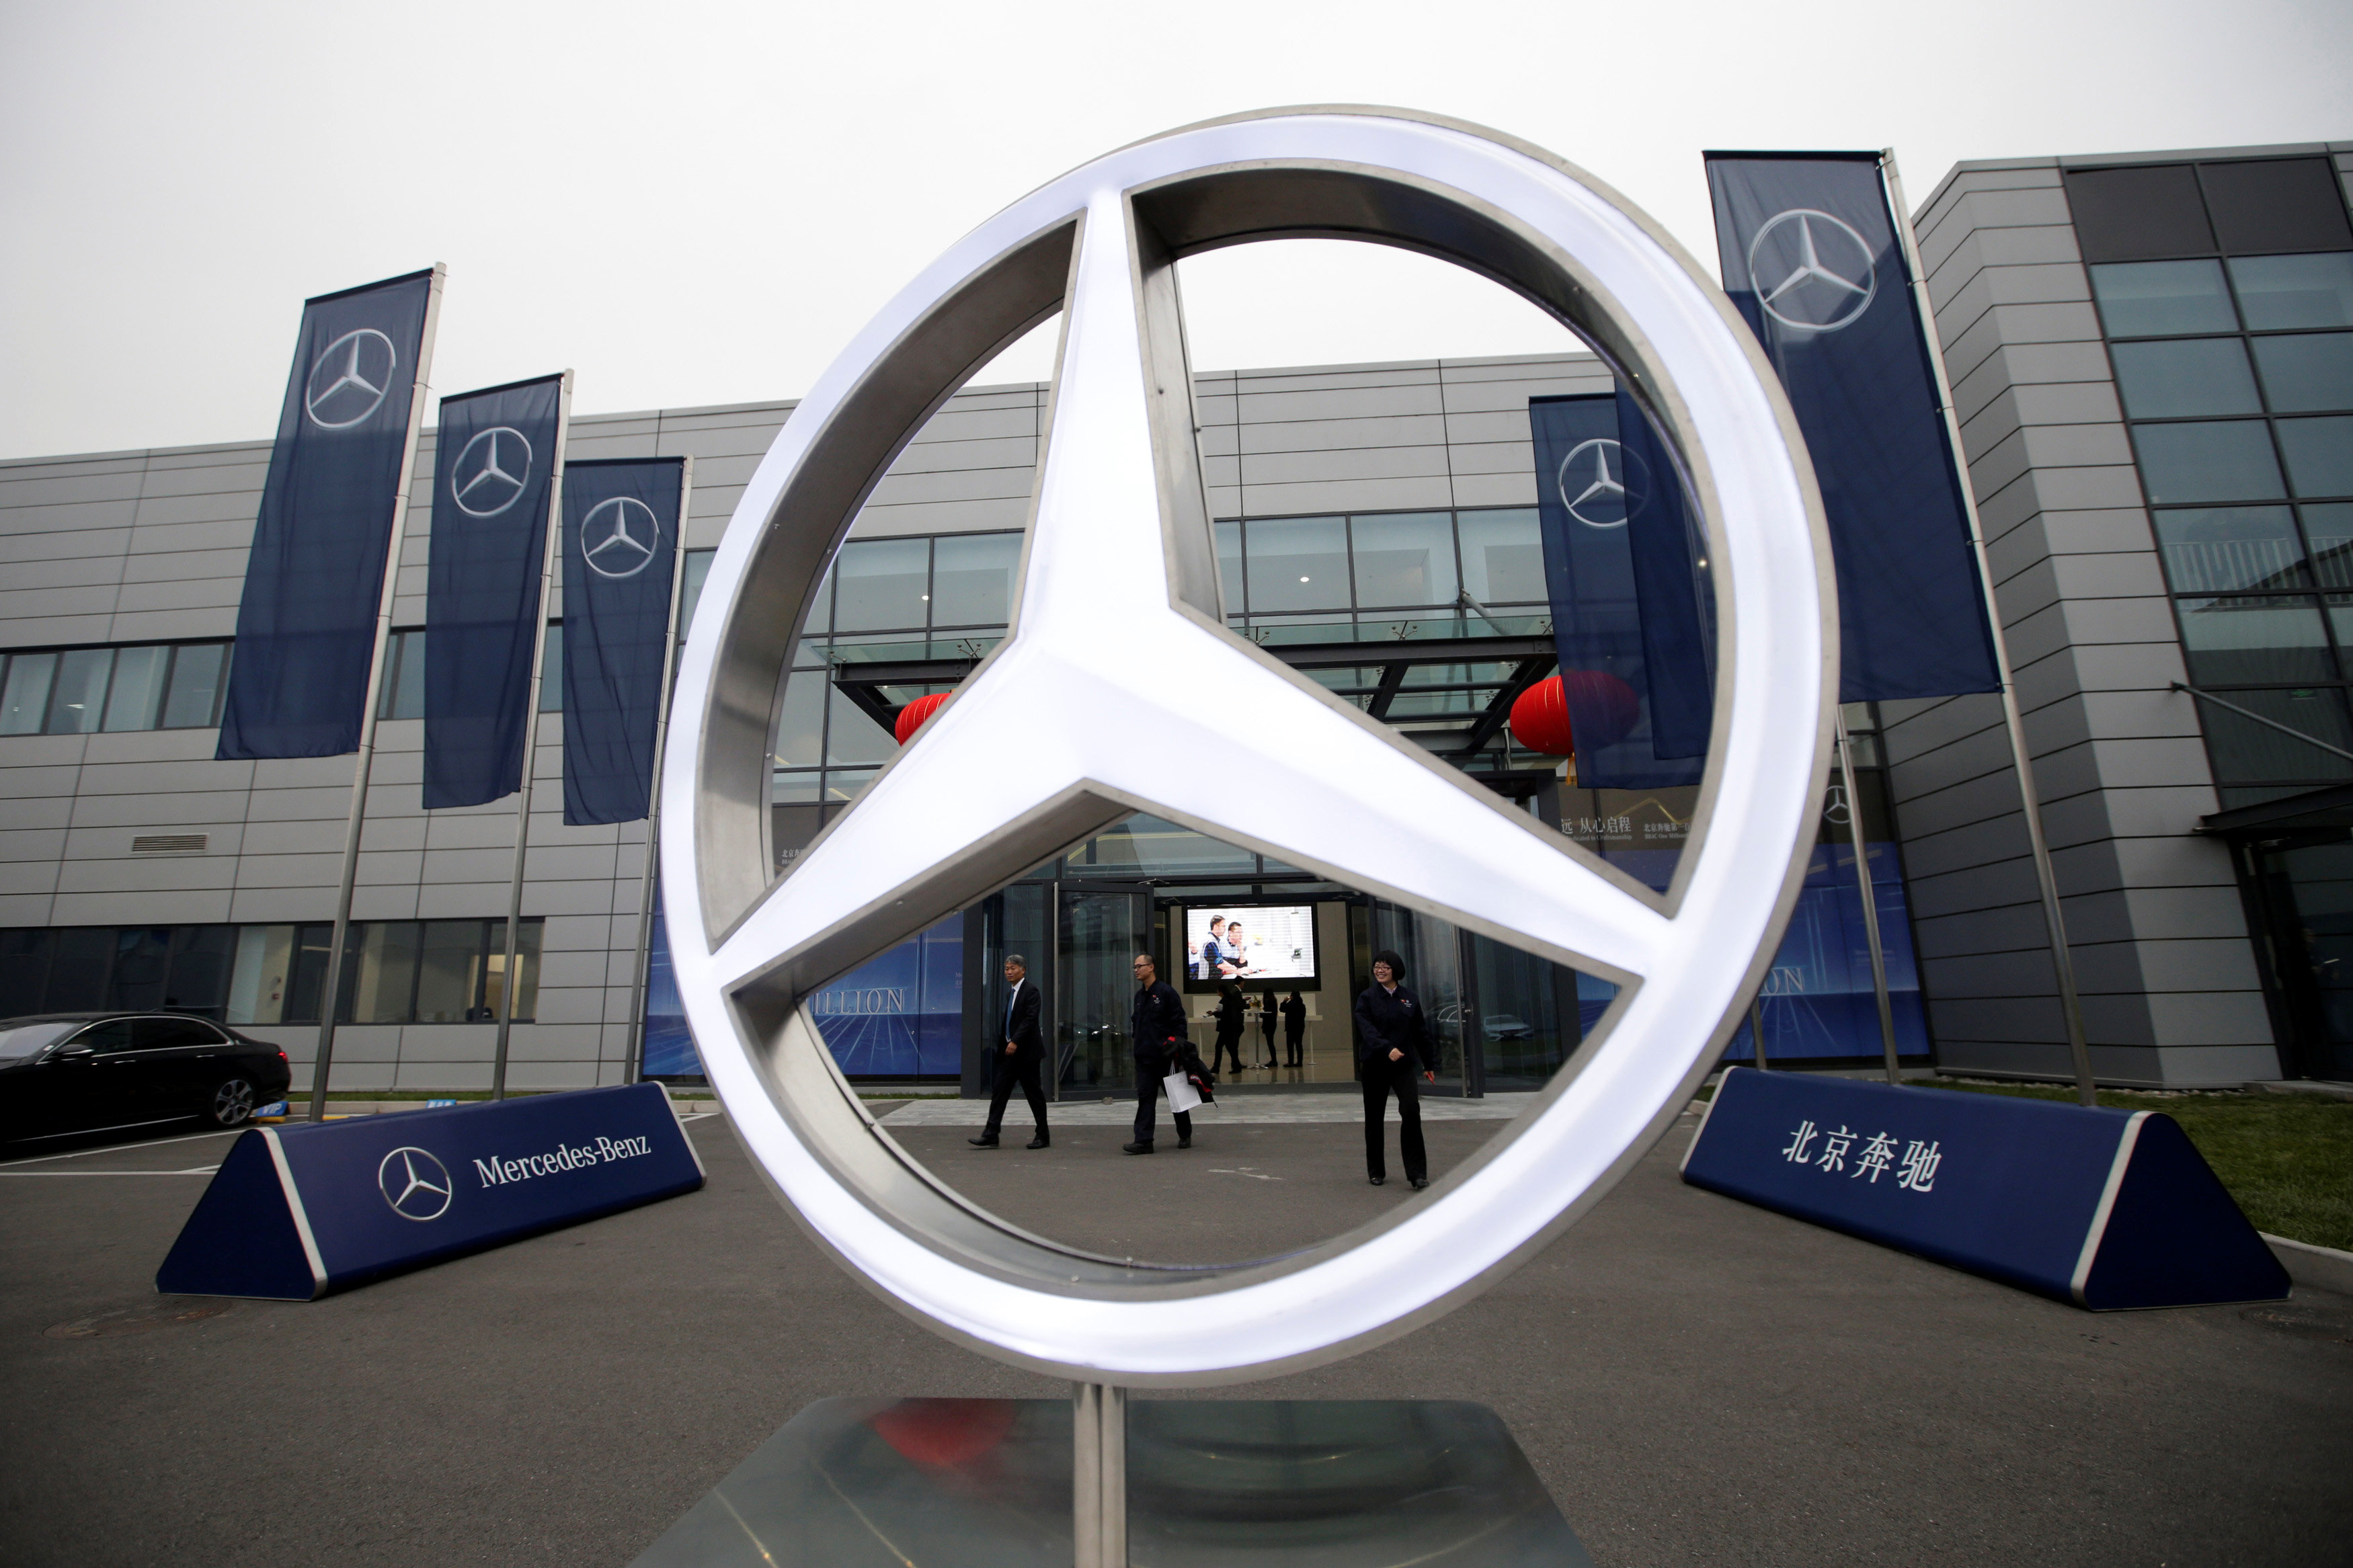 Employees walk near a Mercedes Benz logo after the Beijing Benz Automotive Co., Ltd. (BBAC) One Millionth Vehicle Offline ceremony, to commemorate the one millionth car produced by China's Mercedes Benz plant, in Beijing, China November 17, 2016. REUTERS/